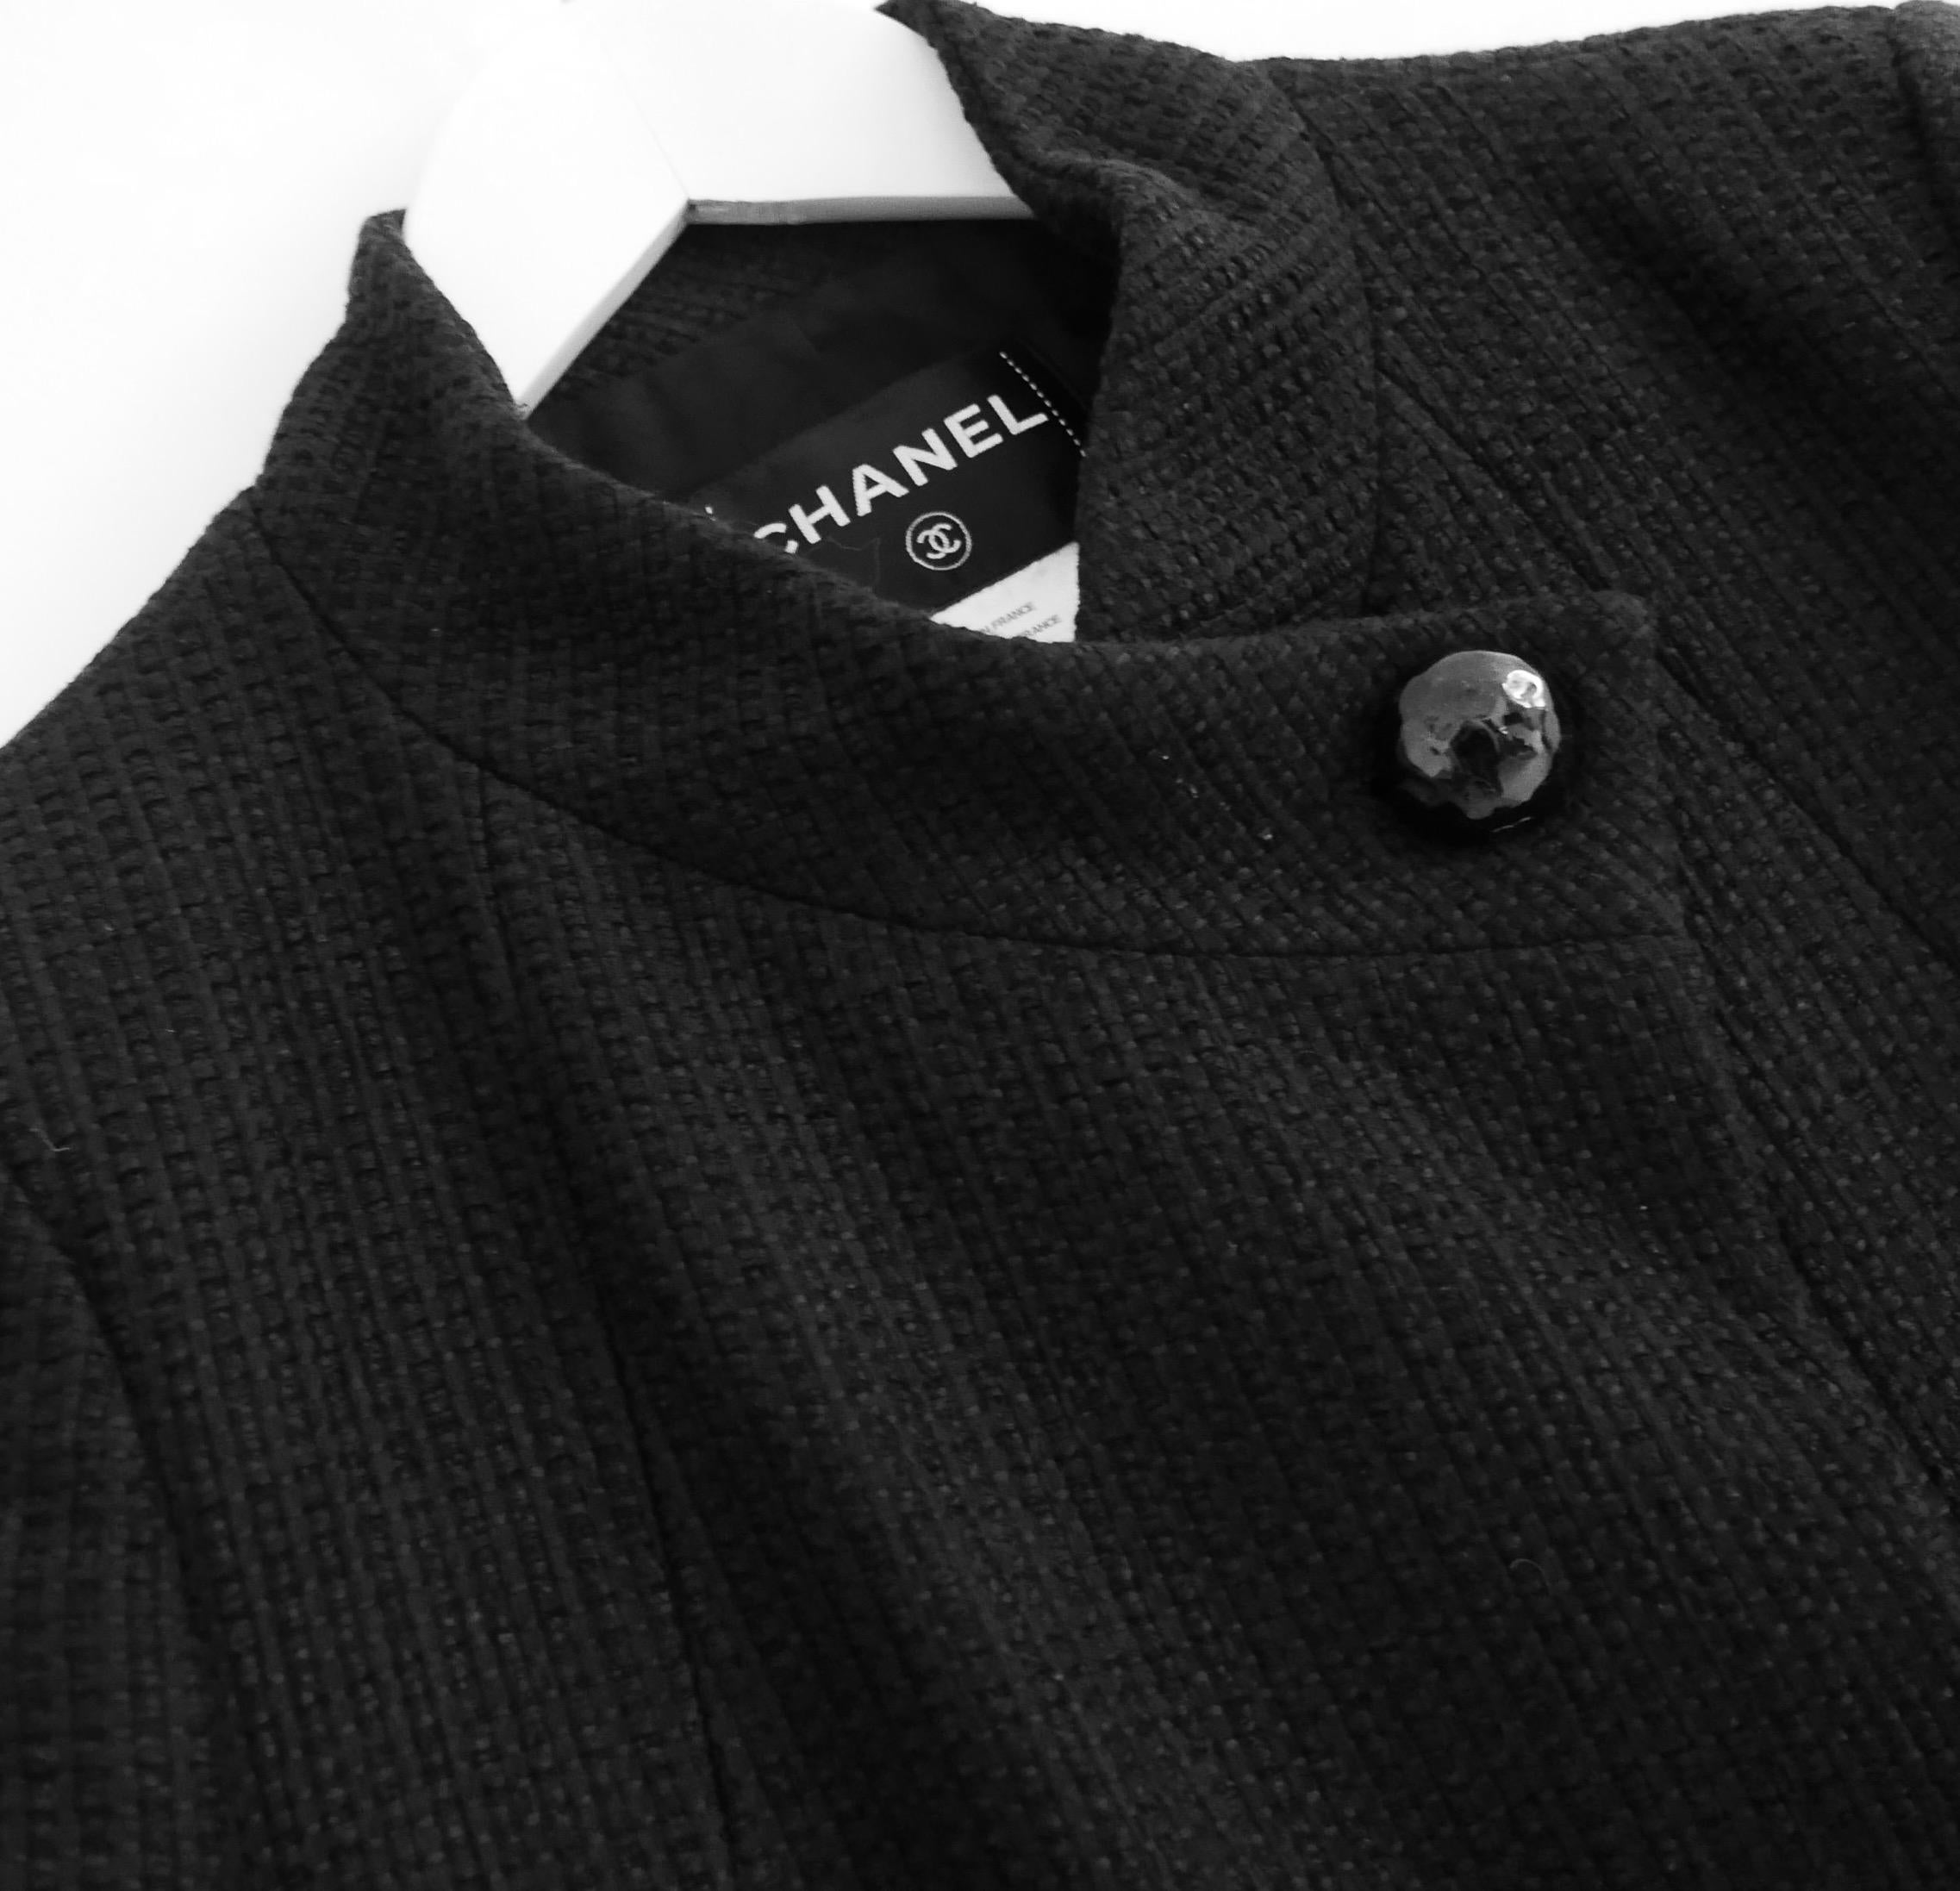 Chanel Resort 2015 Black Tweed Jacket In Excellent Condition For Sale In London, GB